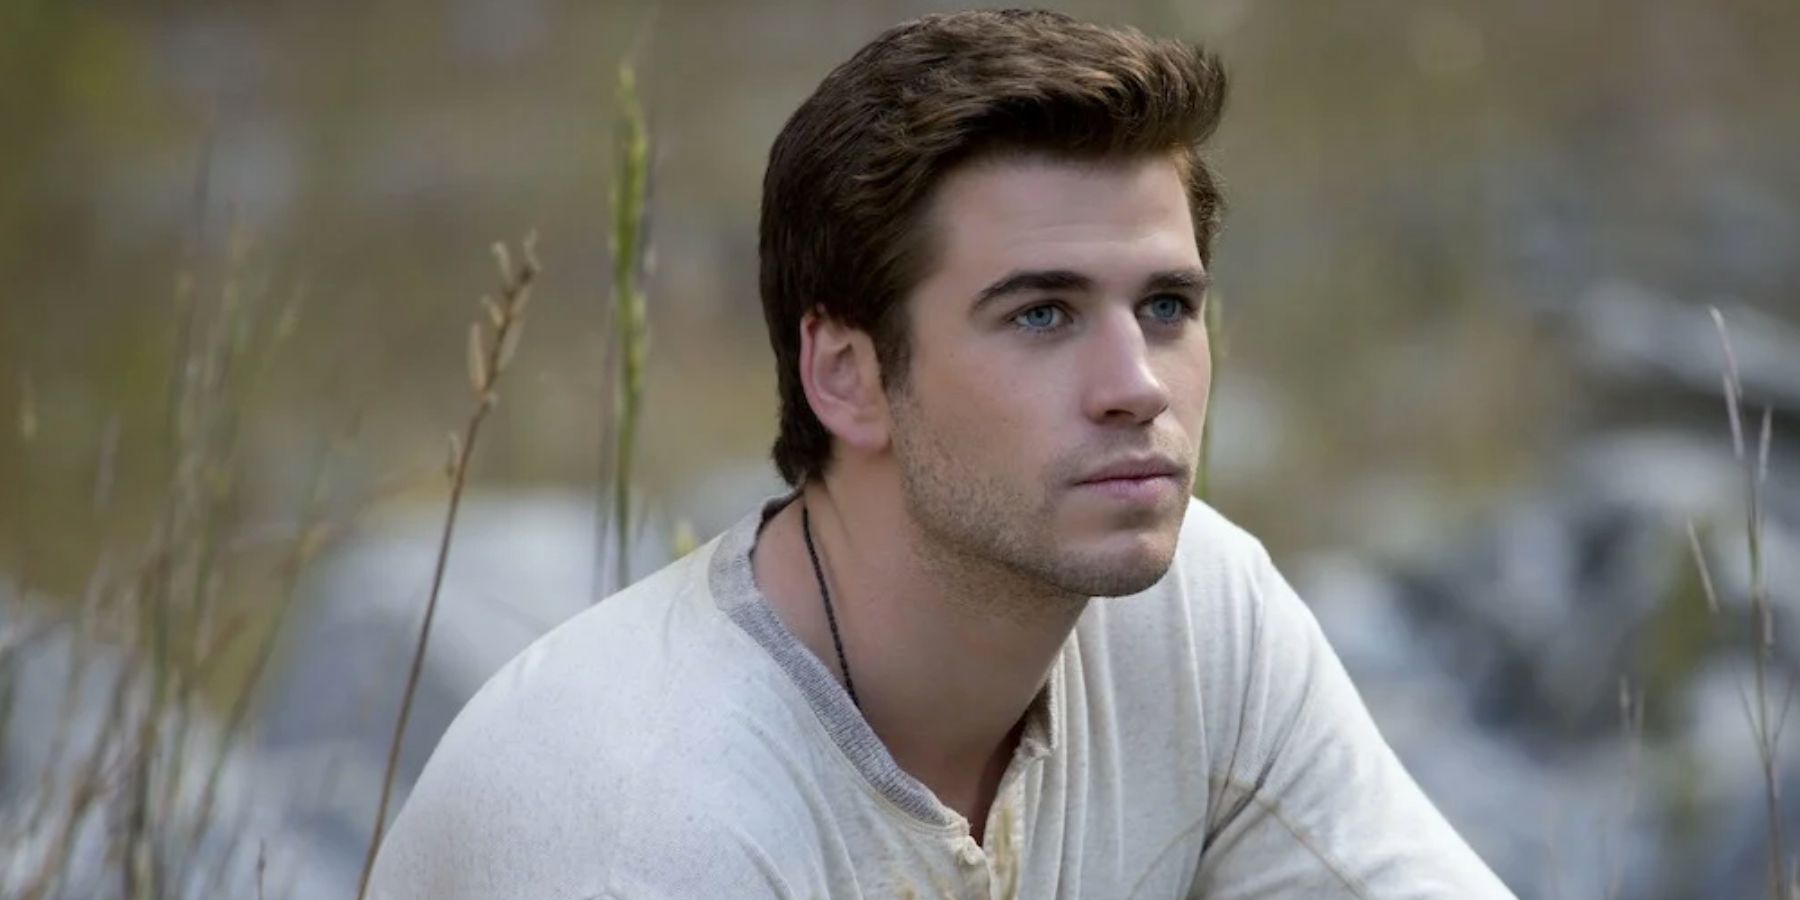 Liam Hemsworth as Gale in the grass in The Hunger Games